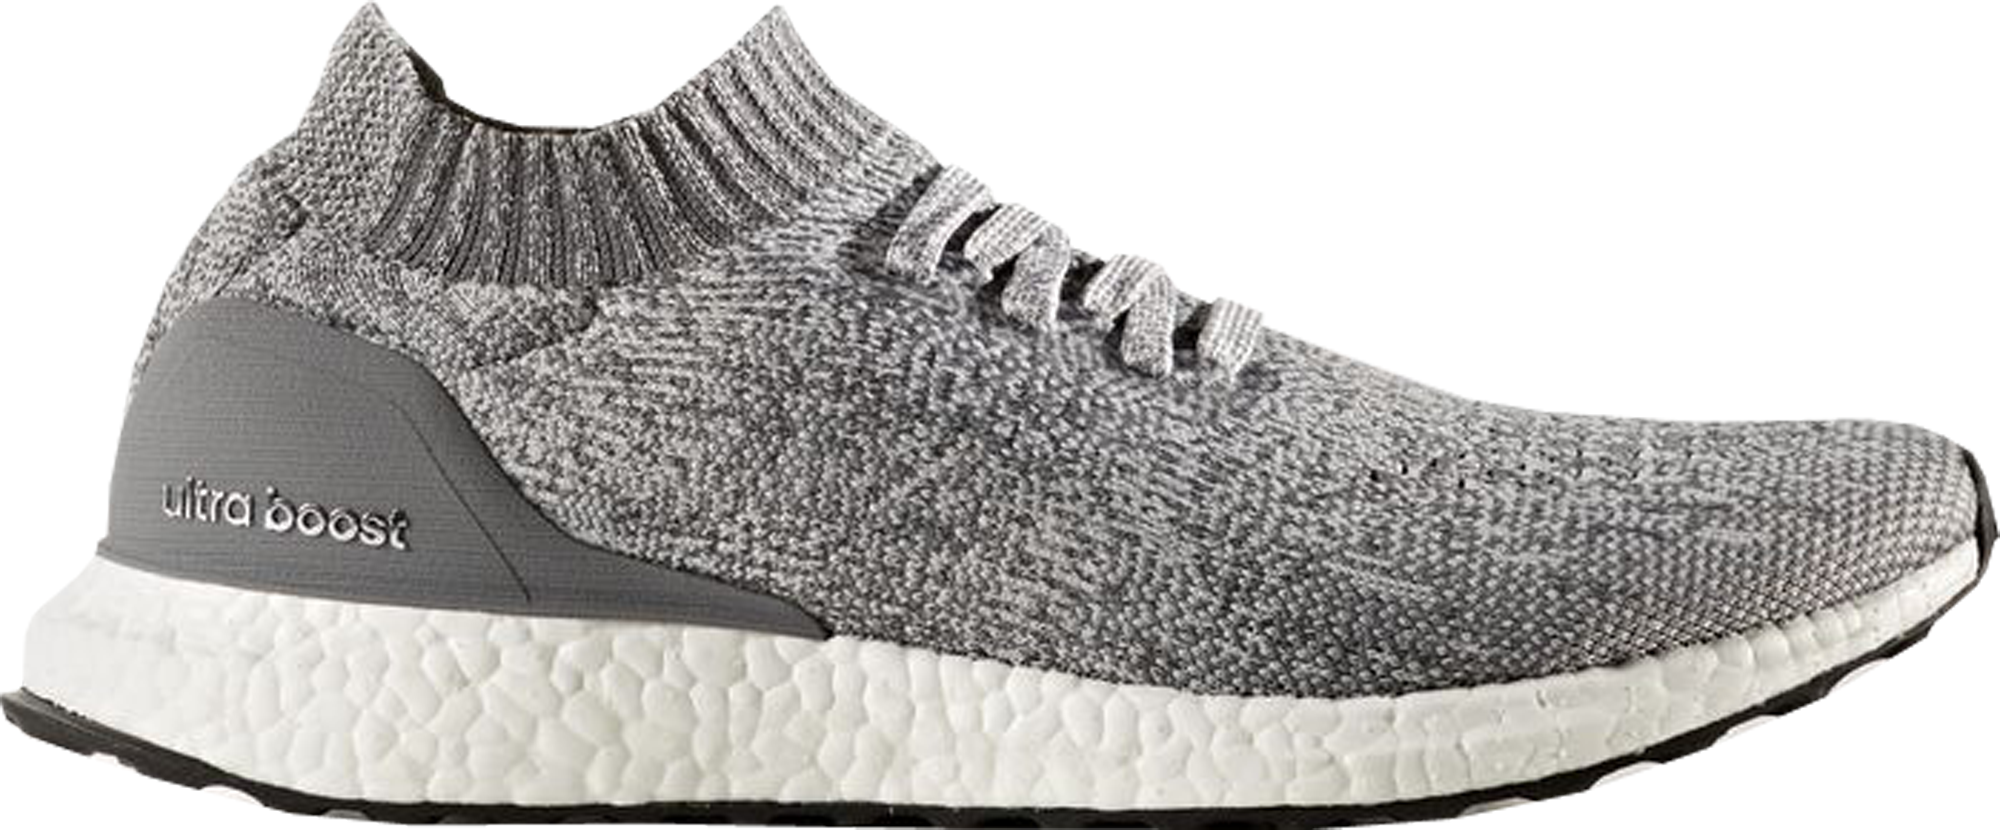 adidas Ultra Boost Uncaged Light Grey - BY2550